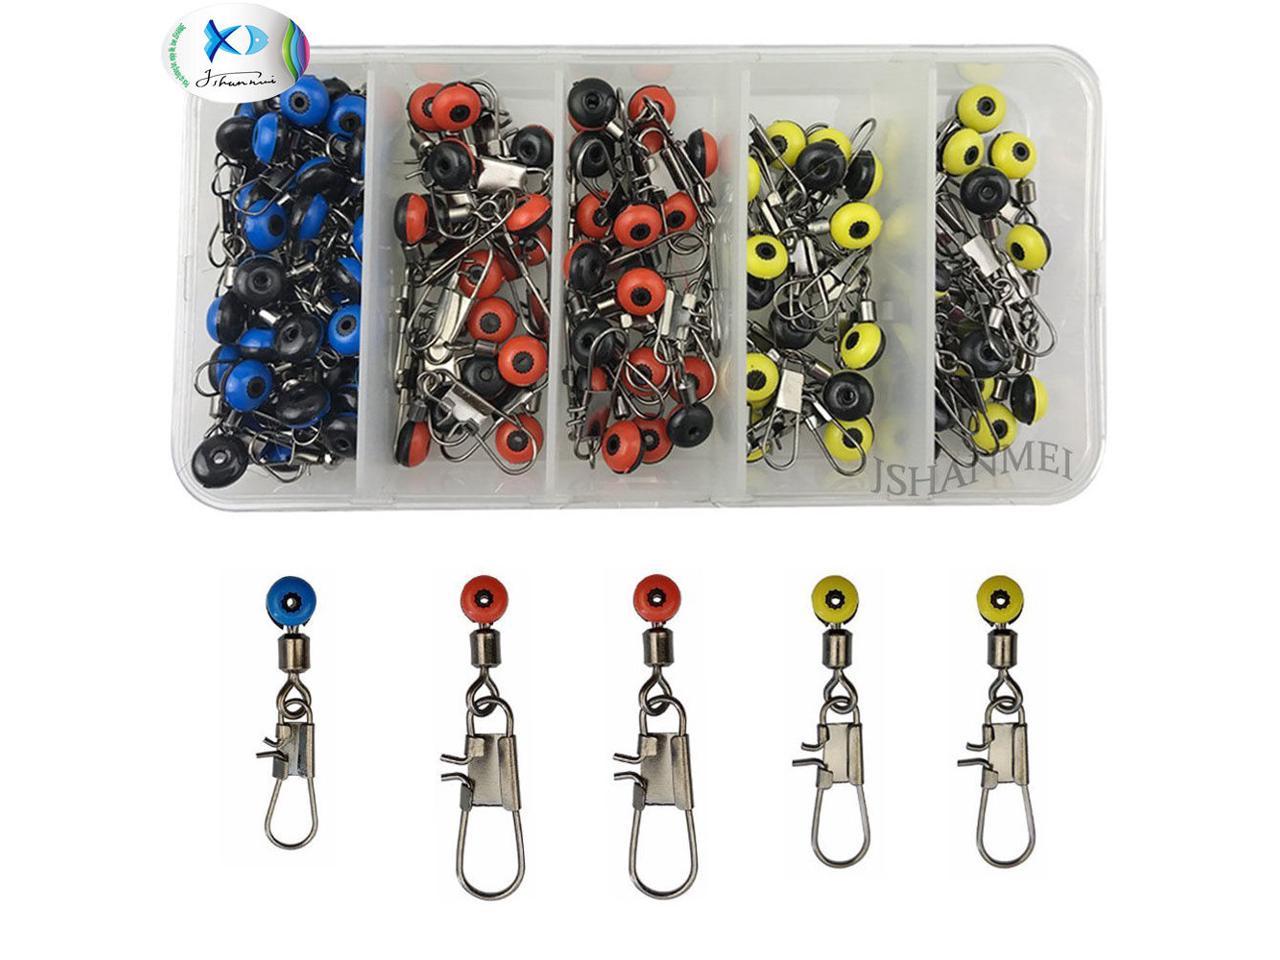 100pcs Fishing Barrel Swivel Pin Connector Solid Rings with Interlock Snap New Q